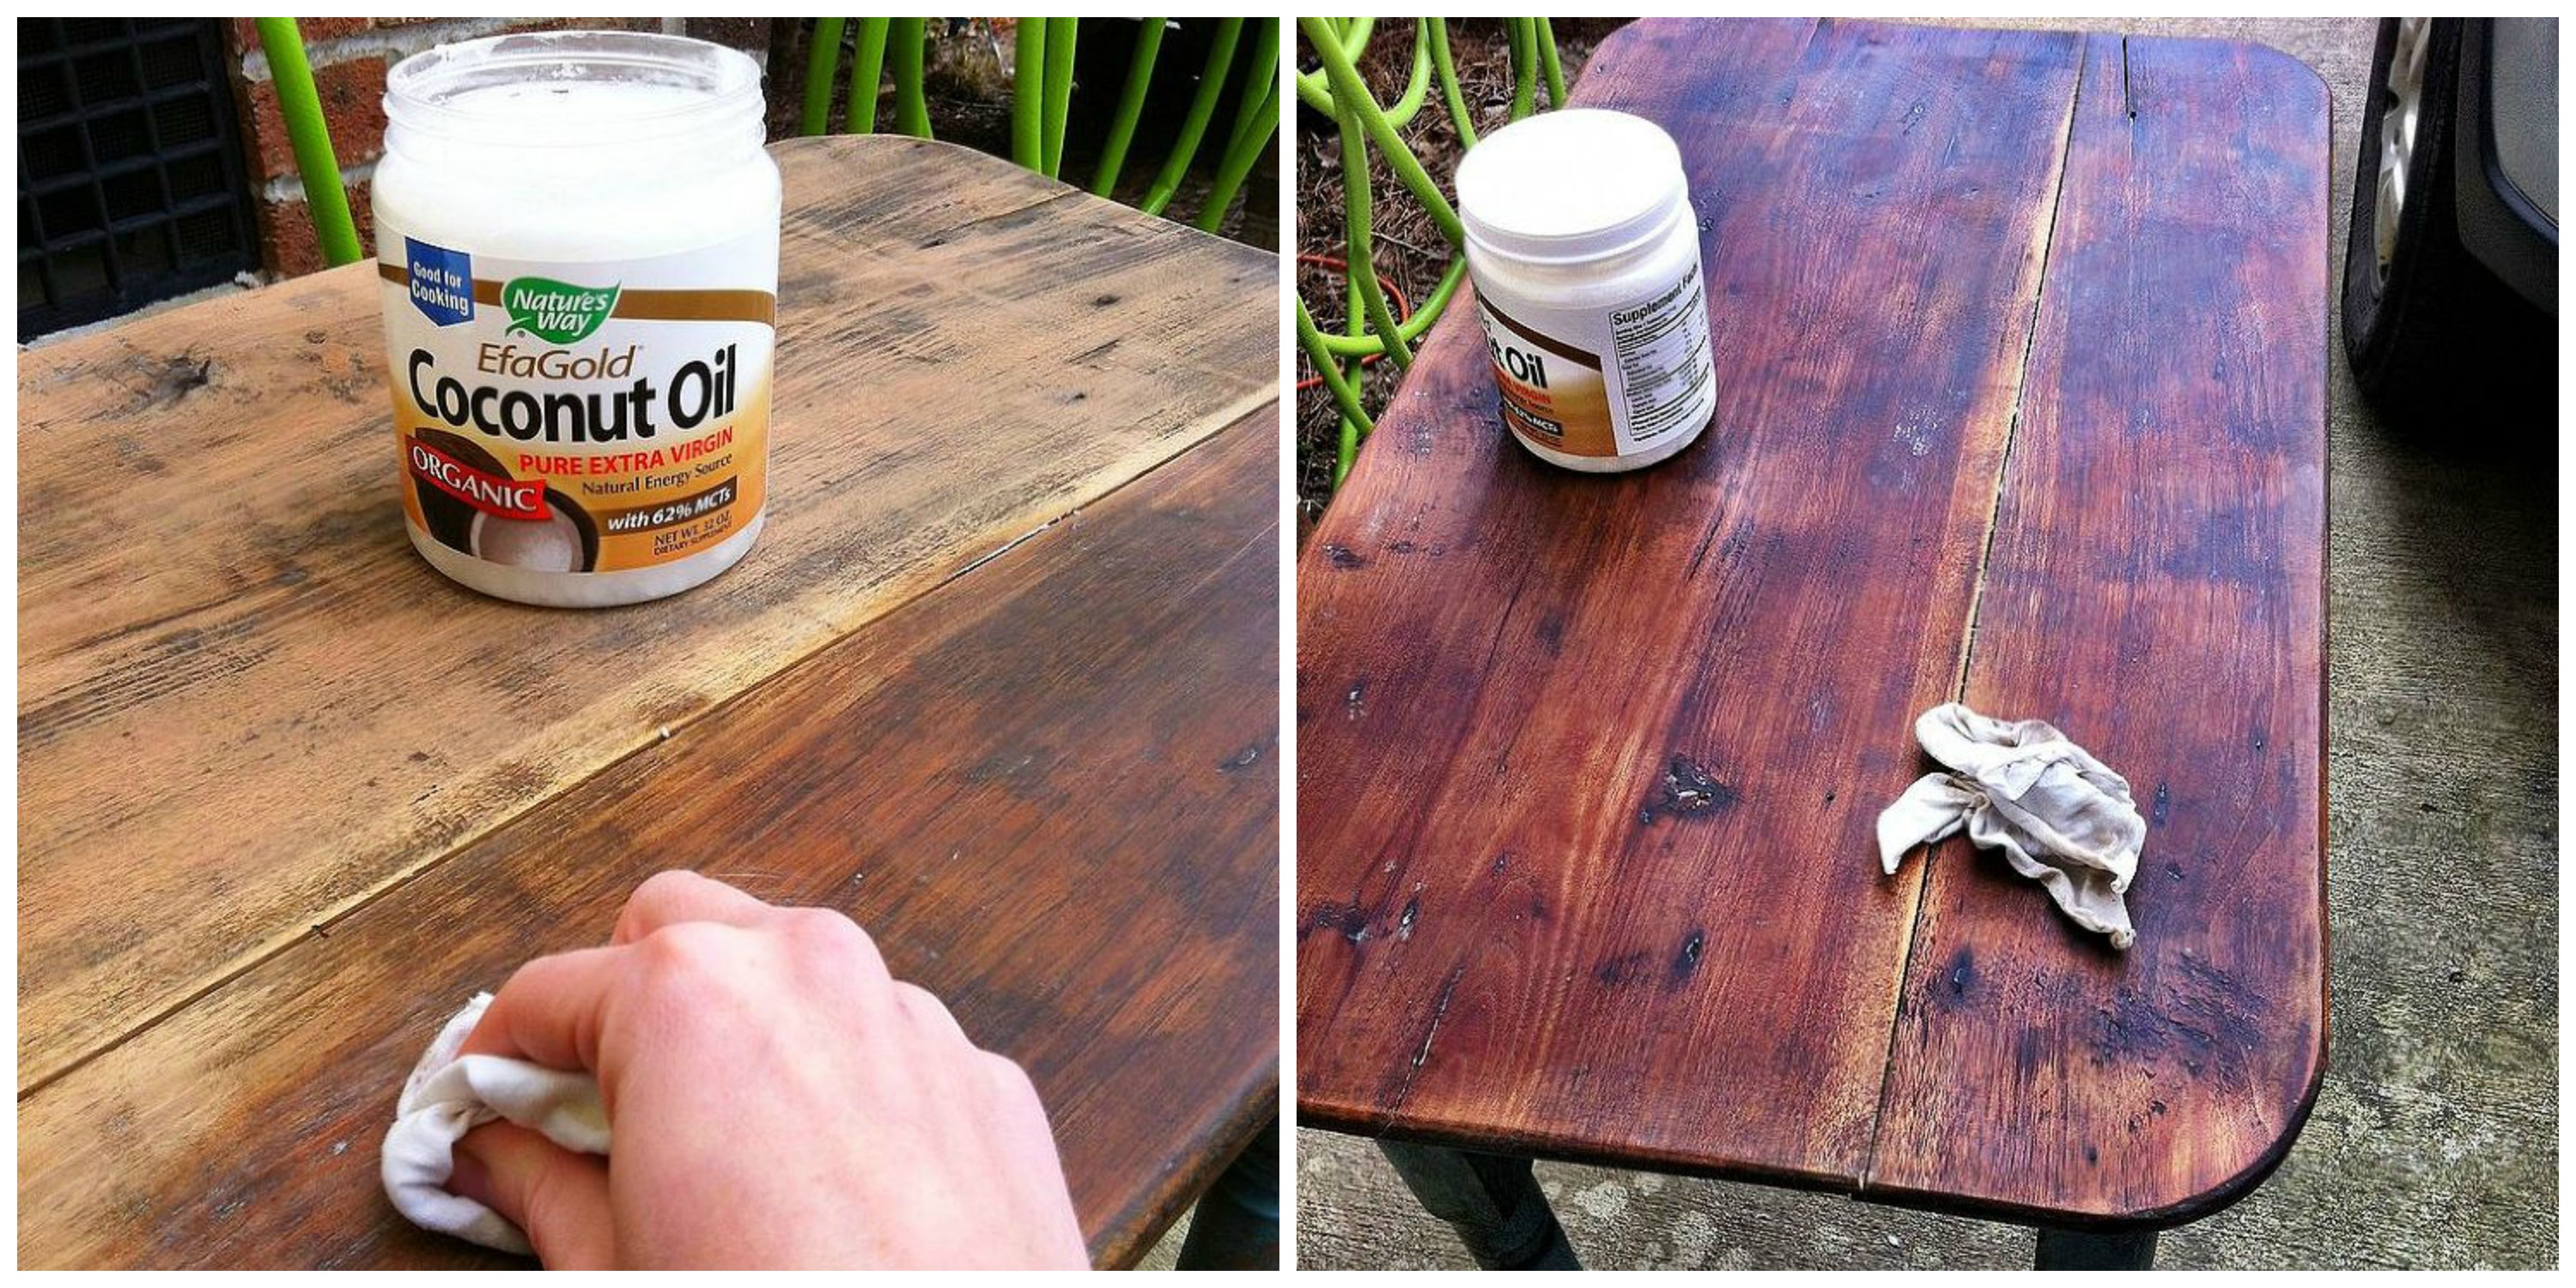 8 Tricks For Repairing And Restoring Wood Damage | Huffpost Life throughout How To Restore Wood Furniture With Vinegar